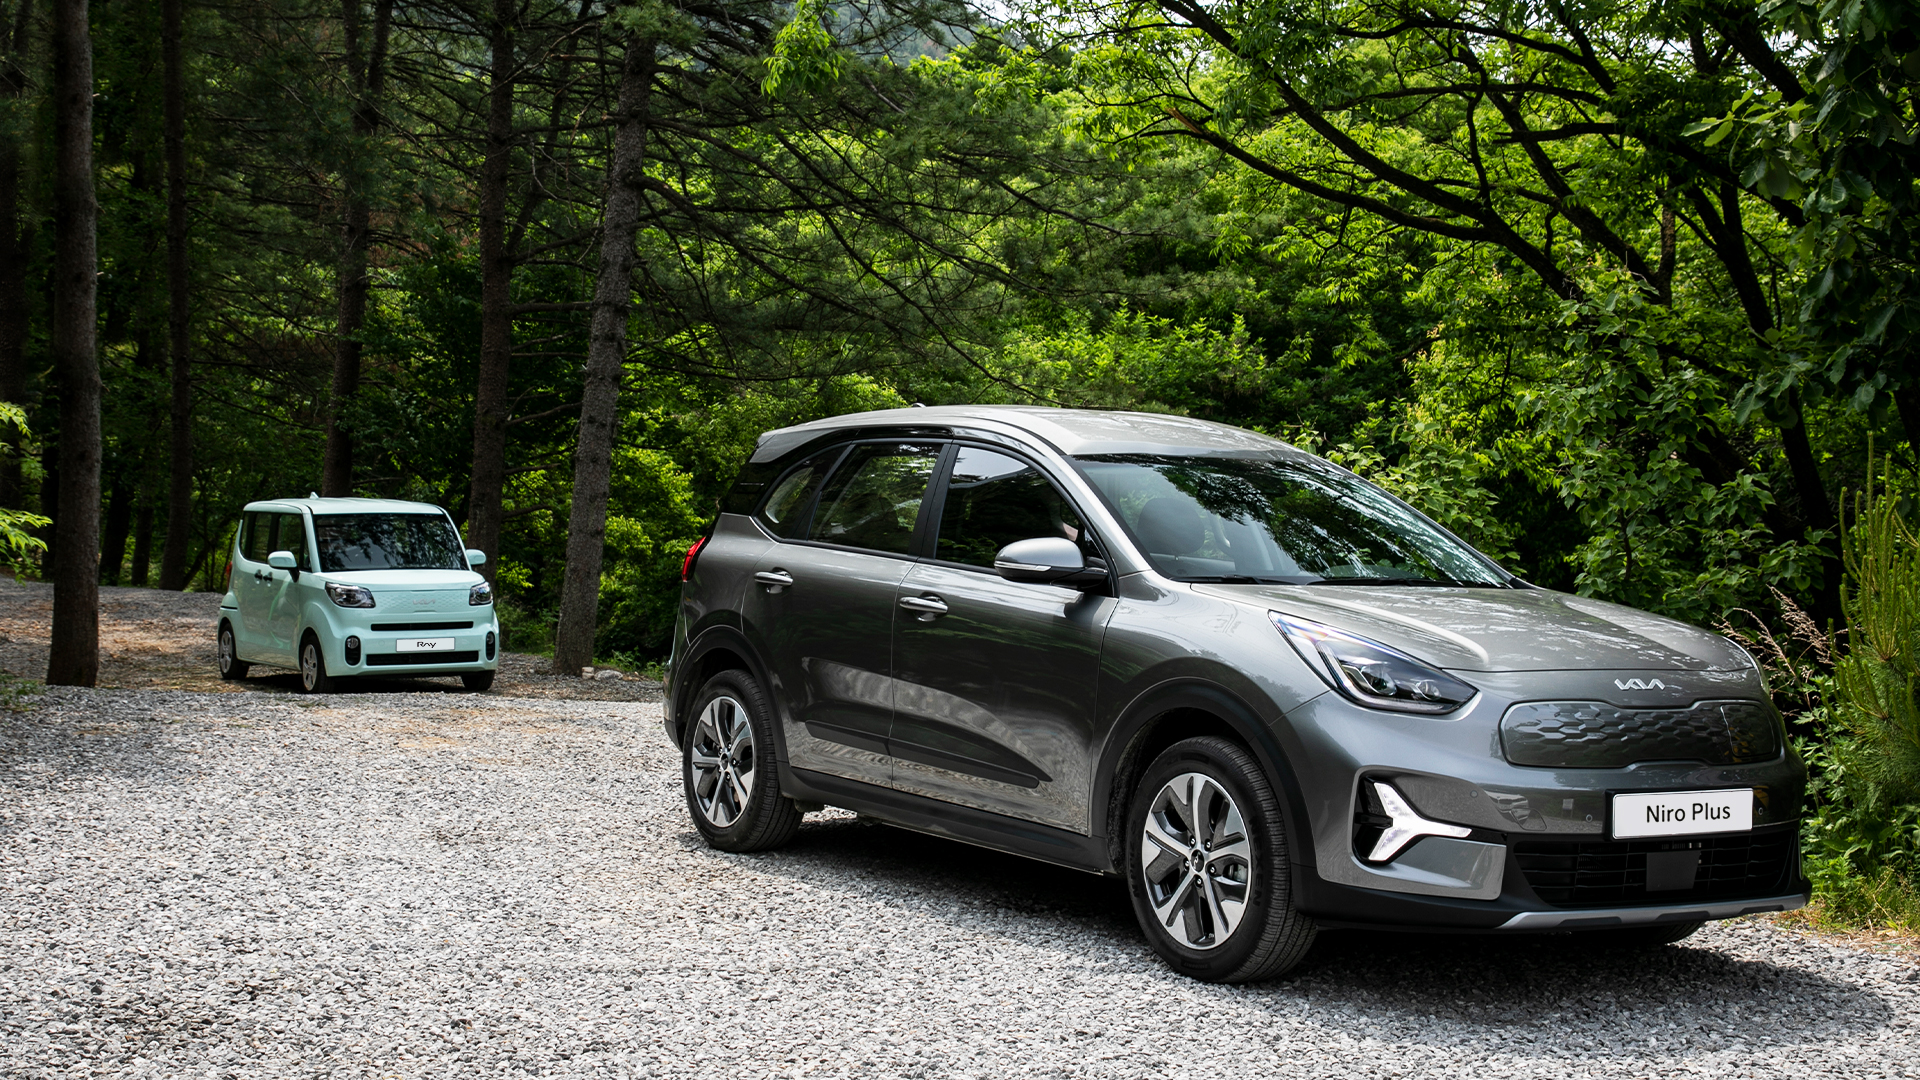 Front side view of single-seater Niro Plus and Ray standing side by side in the forest at the campsite